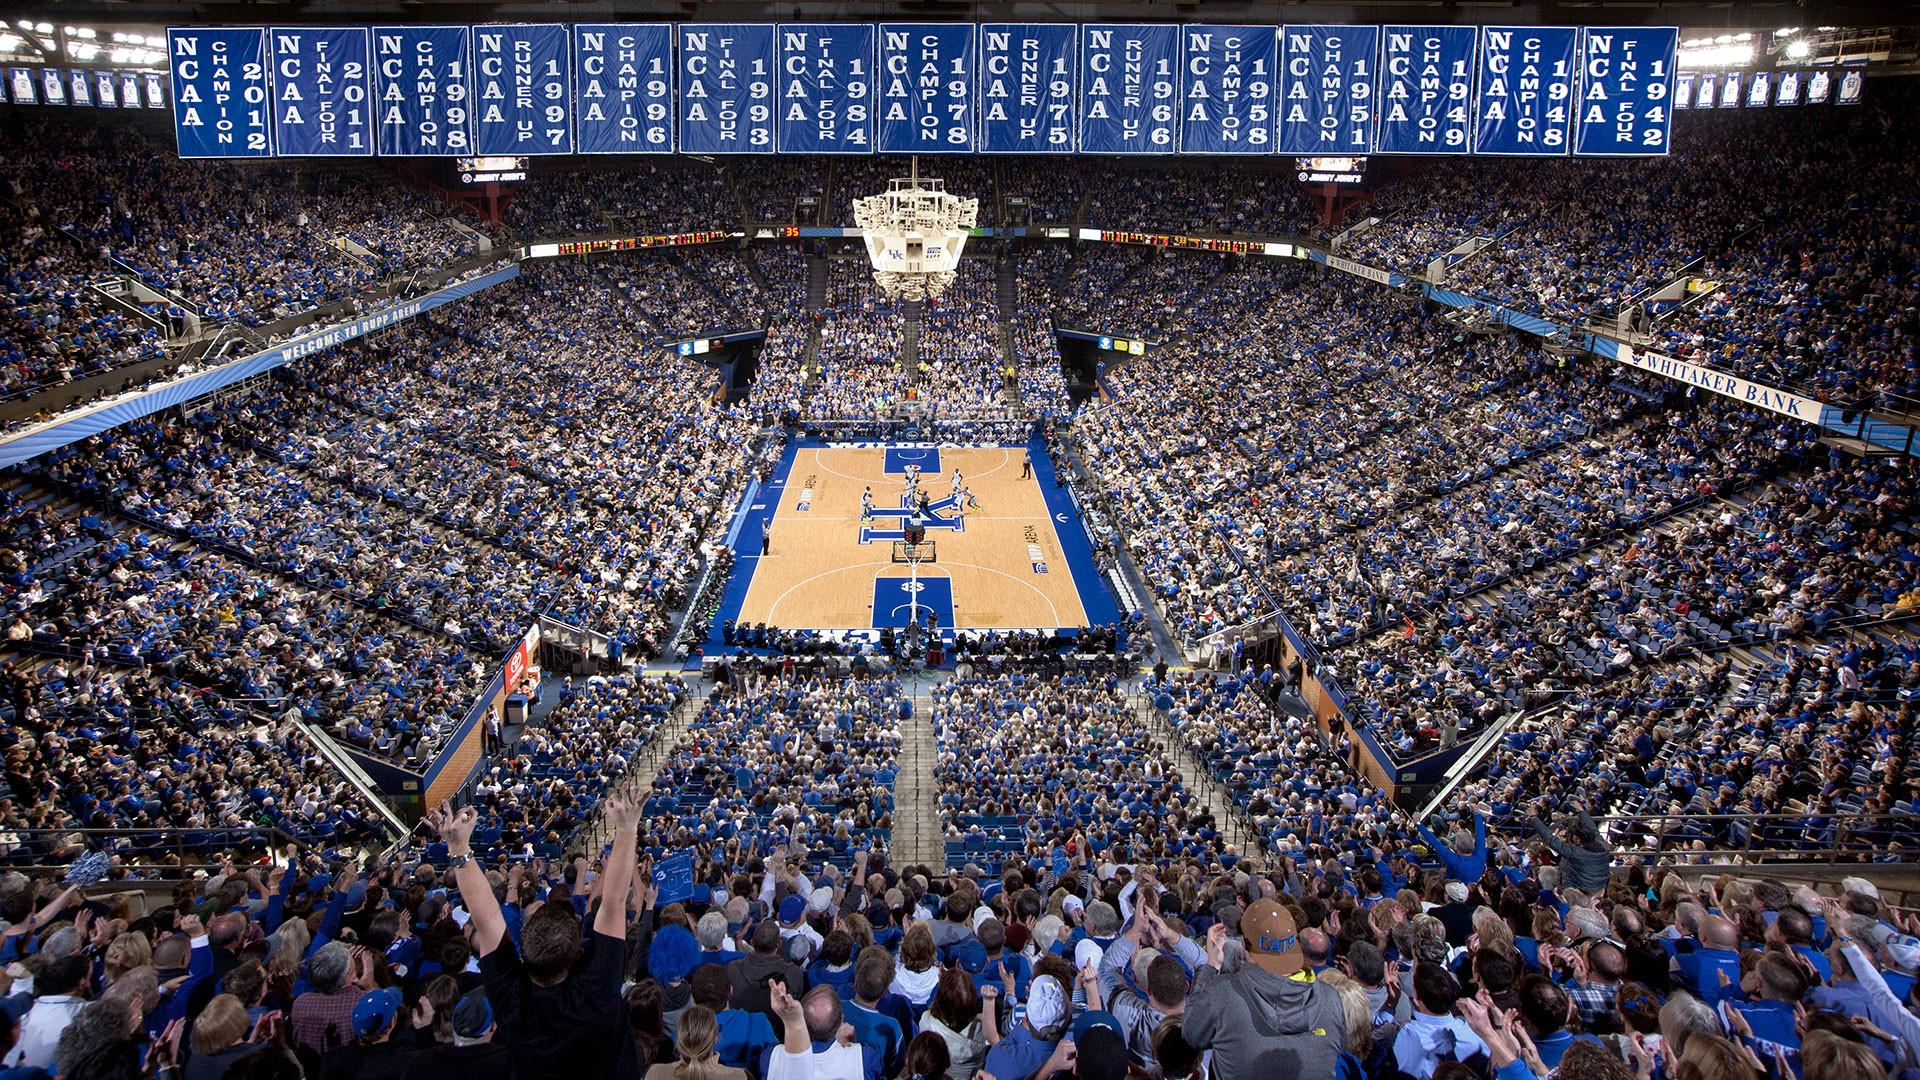 1920x1080 University of Kentucky Chrome Themes, iOS Wallpapers Blogs for 800Ã800  Kentucky Basketball Wallpapers (47 Wallpapers) | Adorable Wallpapers |  Pinterest ...